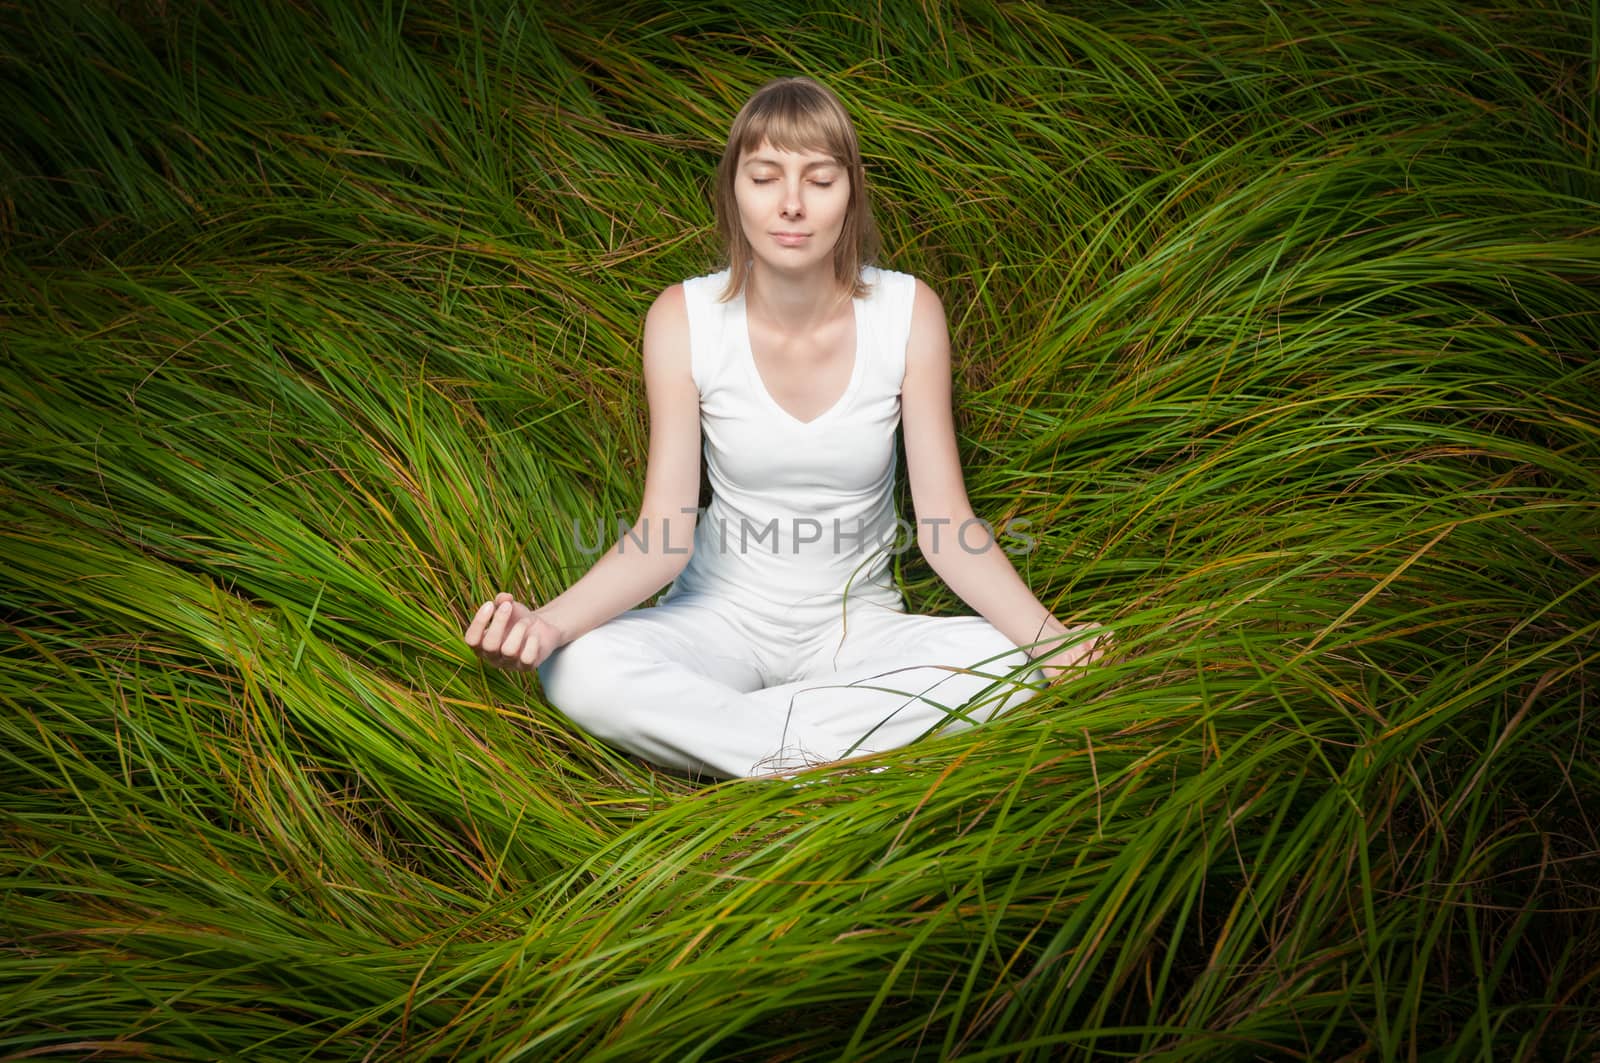 Cute blonde girl in white clothes meditating on green grass. Woman sitting in lotus position, eyes are closed, her hands lay on her knees. Girl is alone. Atmosphere of unity with nature and harmony.